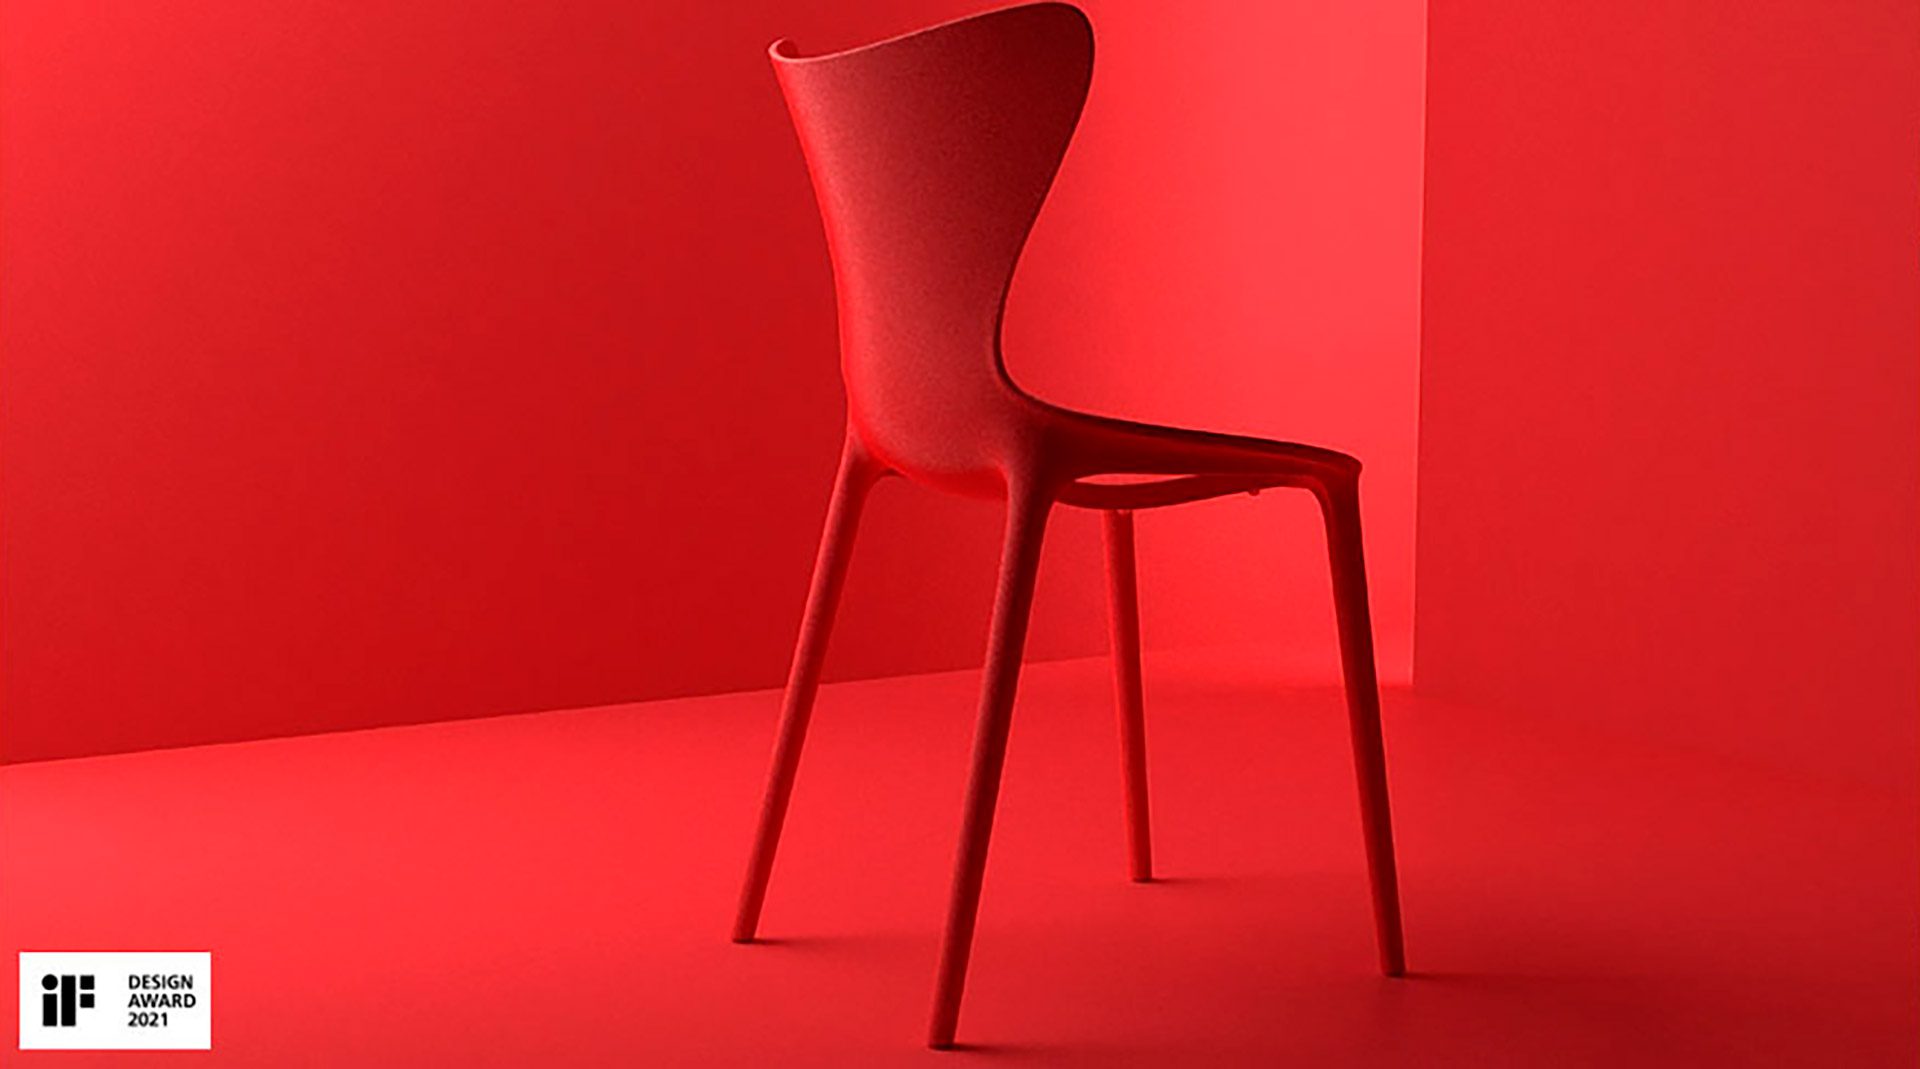 Representing Valencian design: Love, by Eugeni Quitllet and Vondom, honored at the 2021 iF Design Awards.